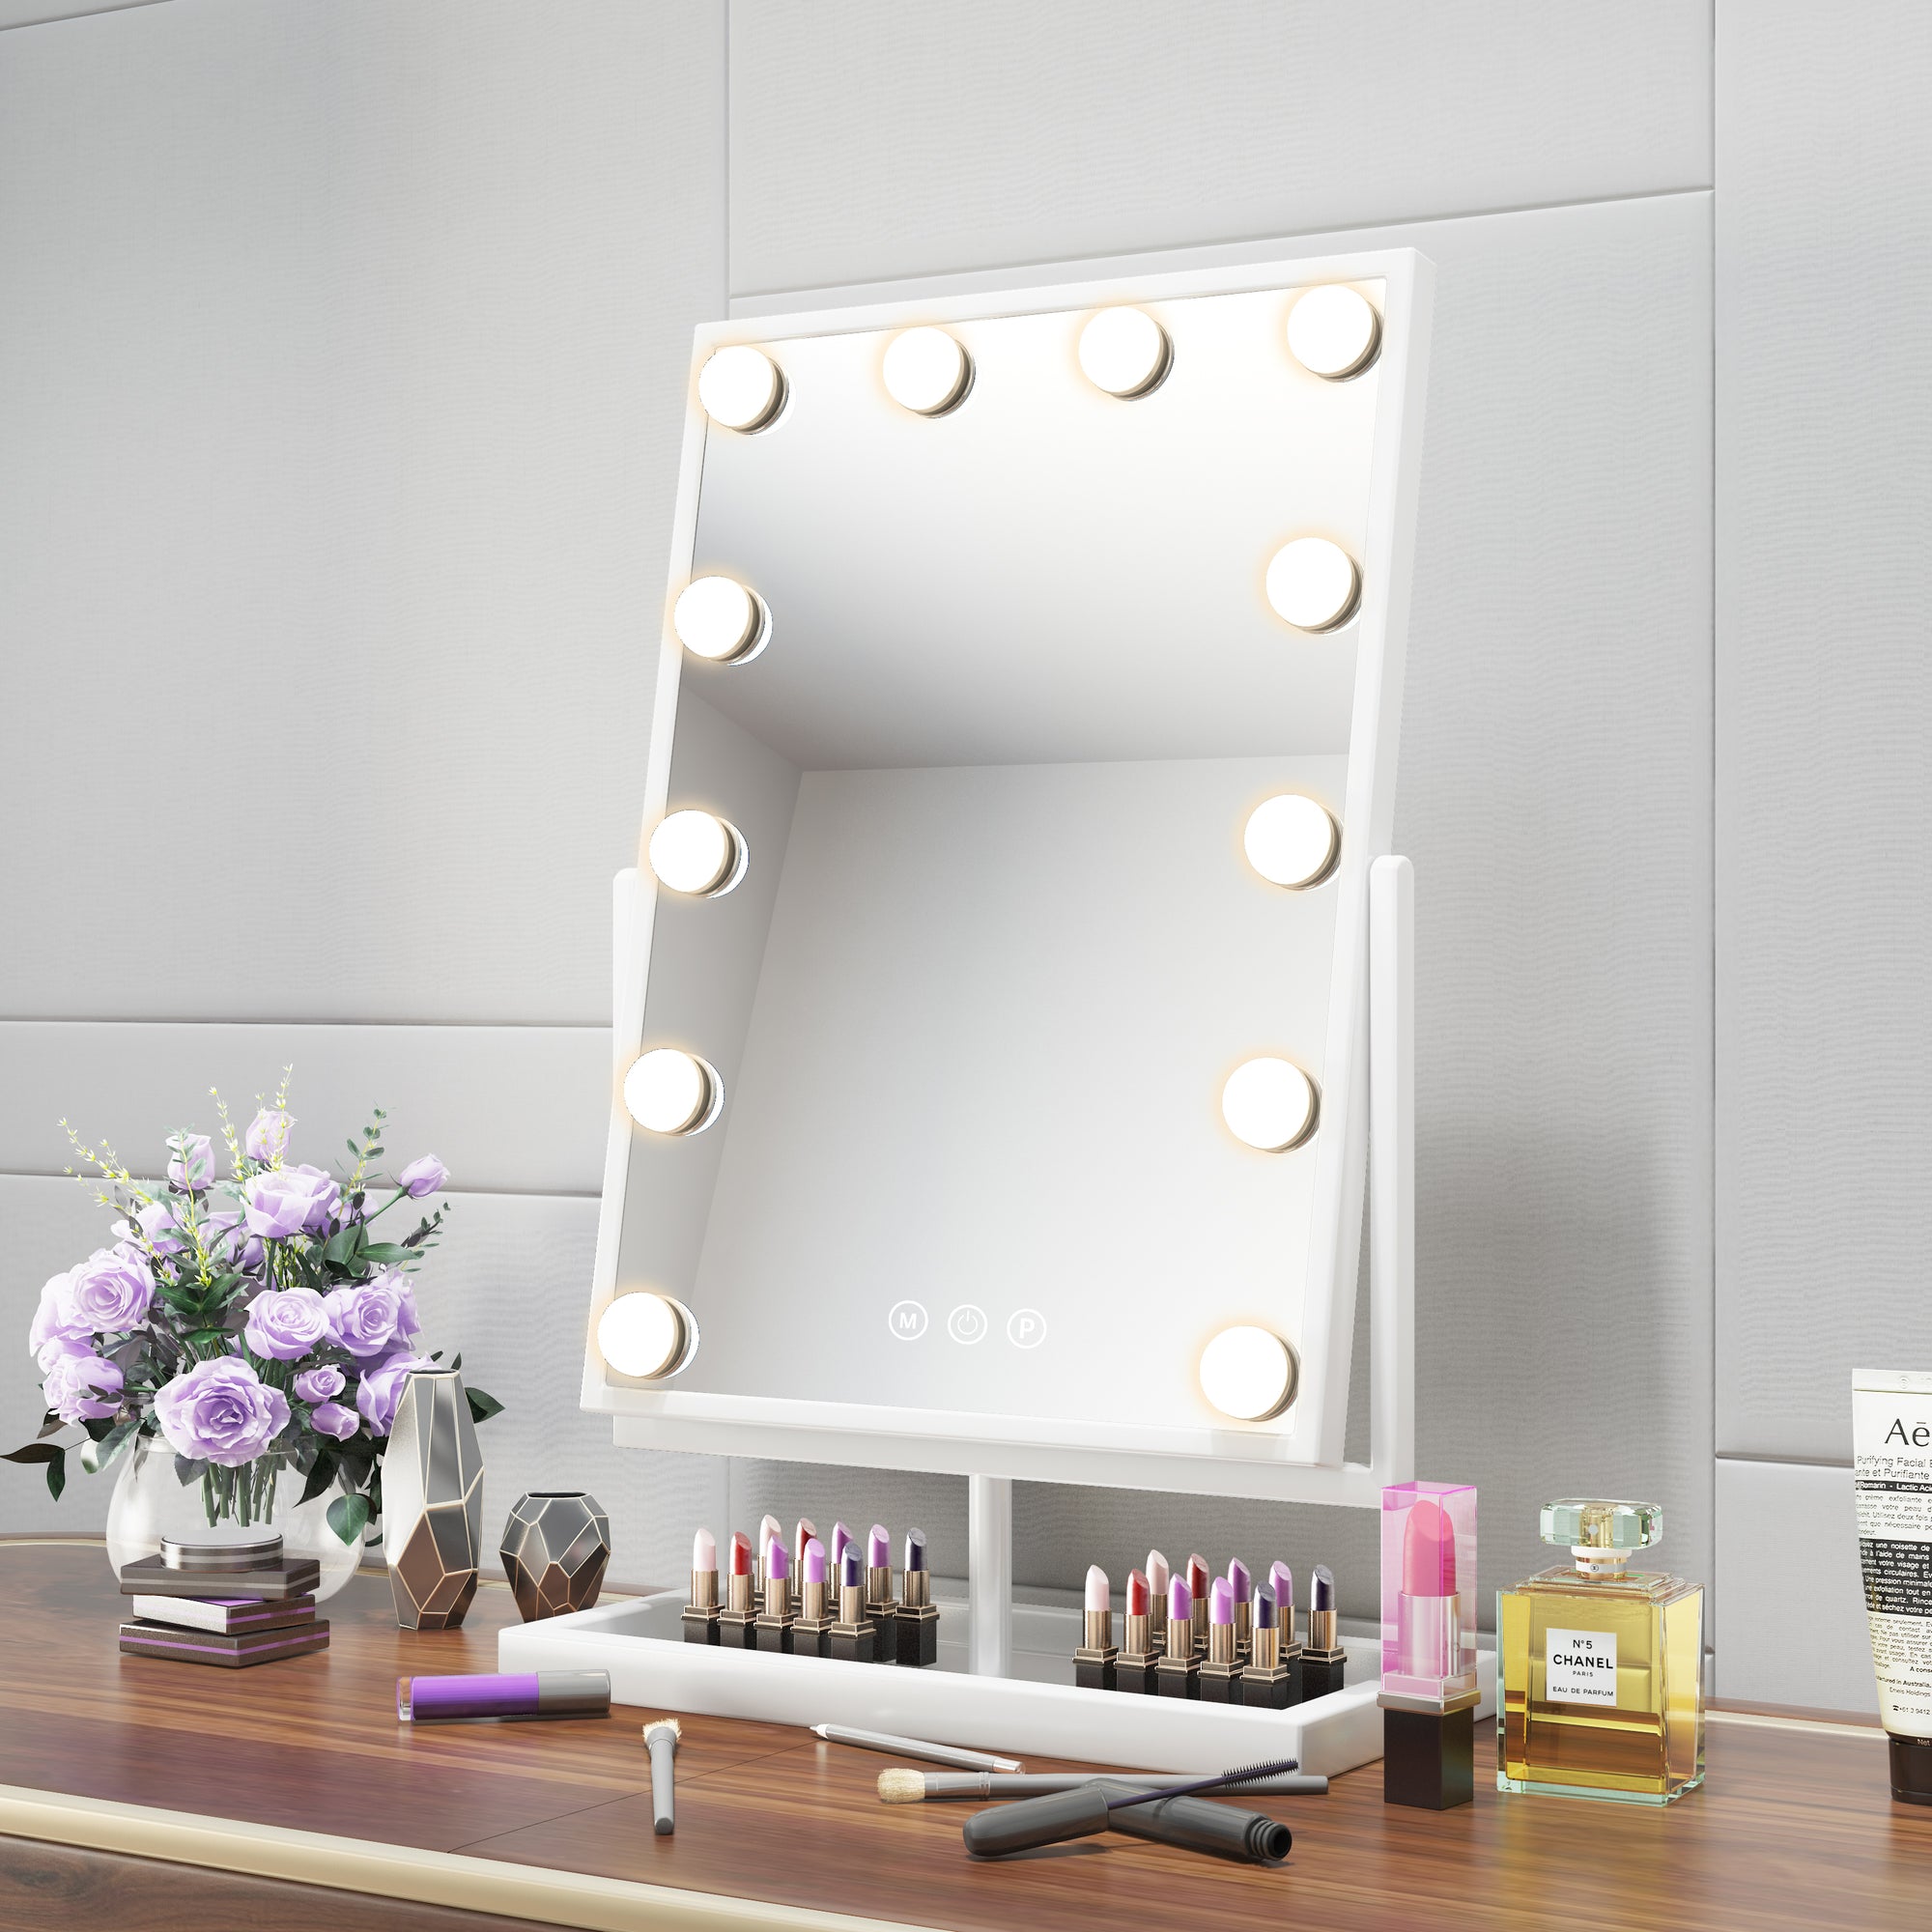 How to Use Mirrors to Brighten a Room